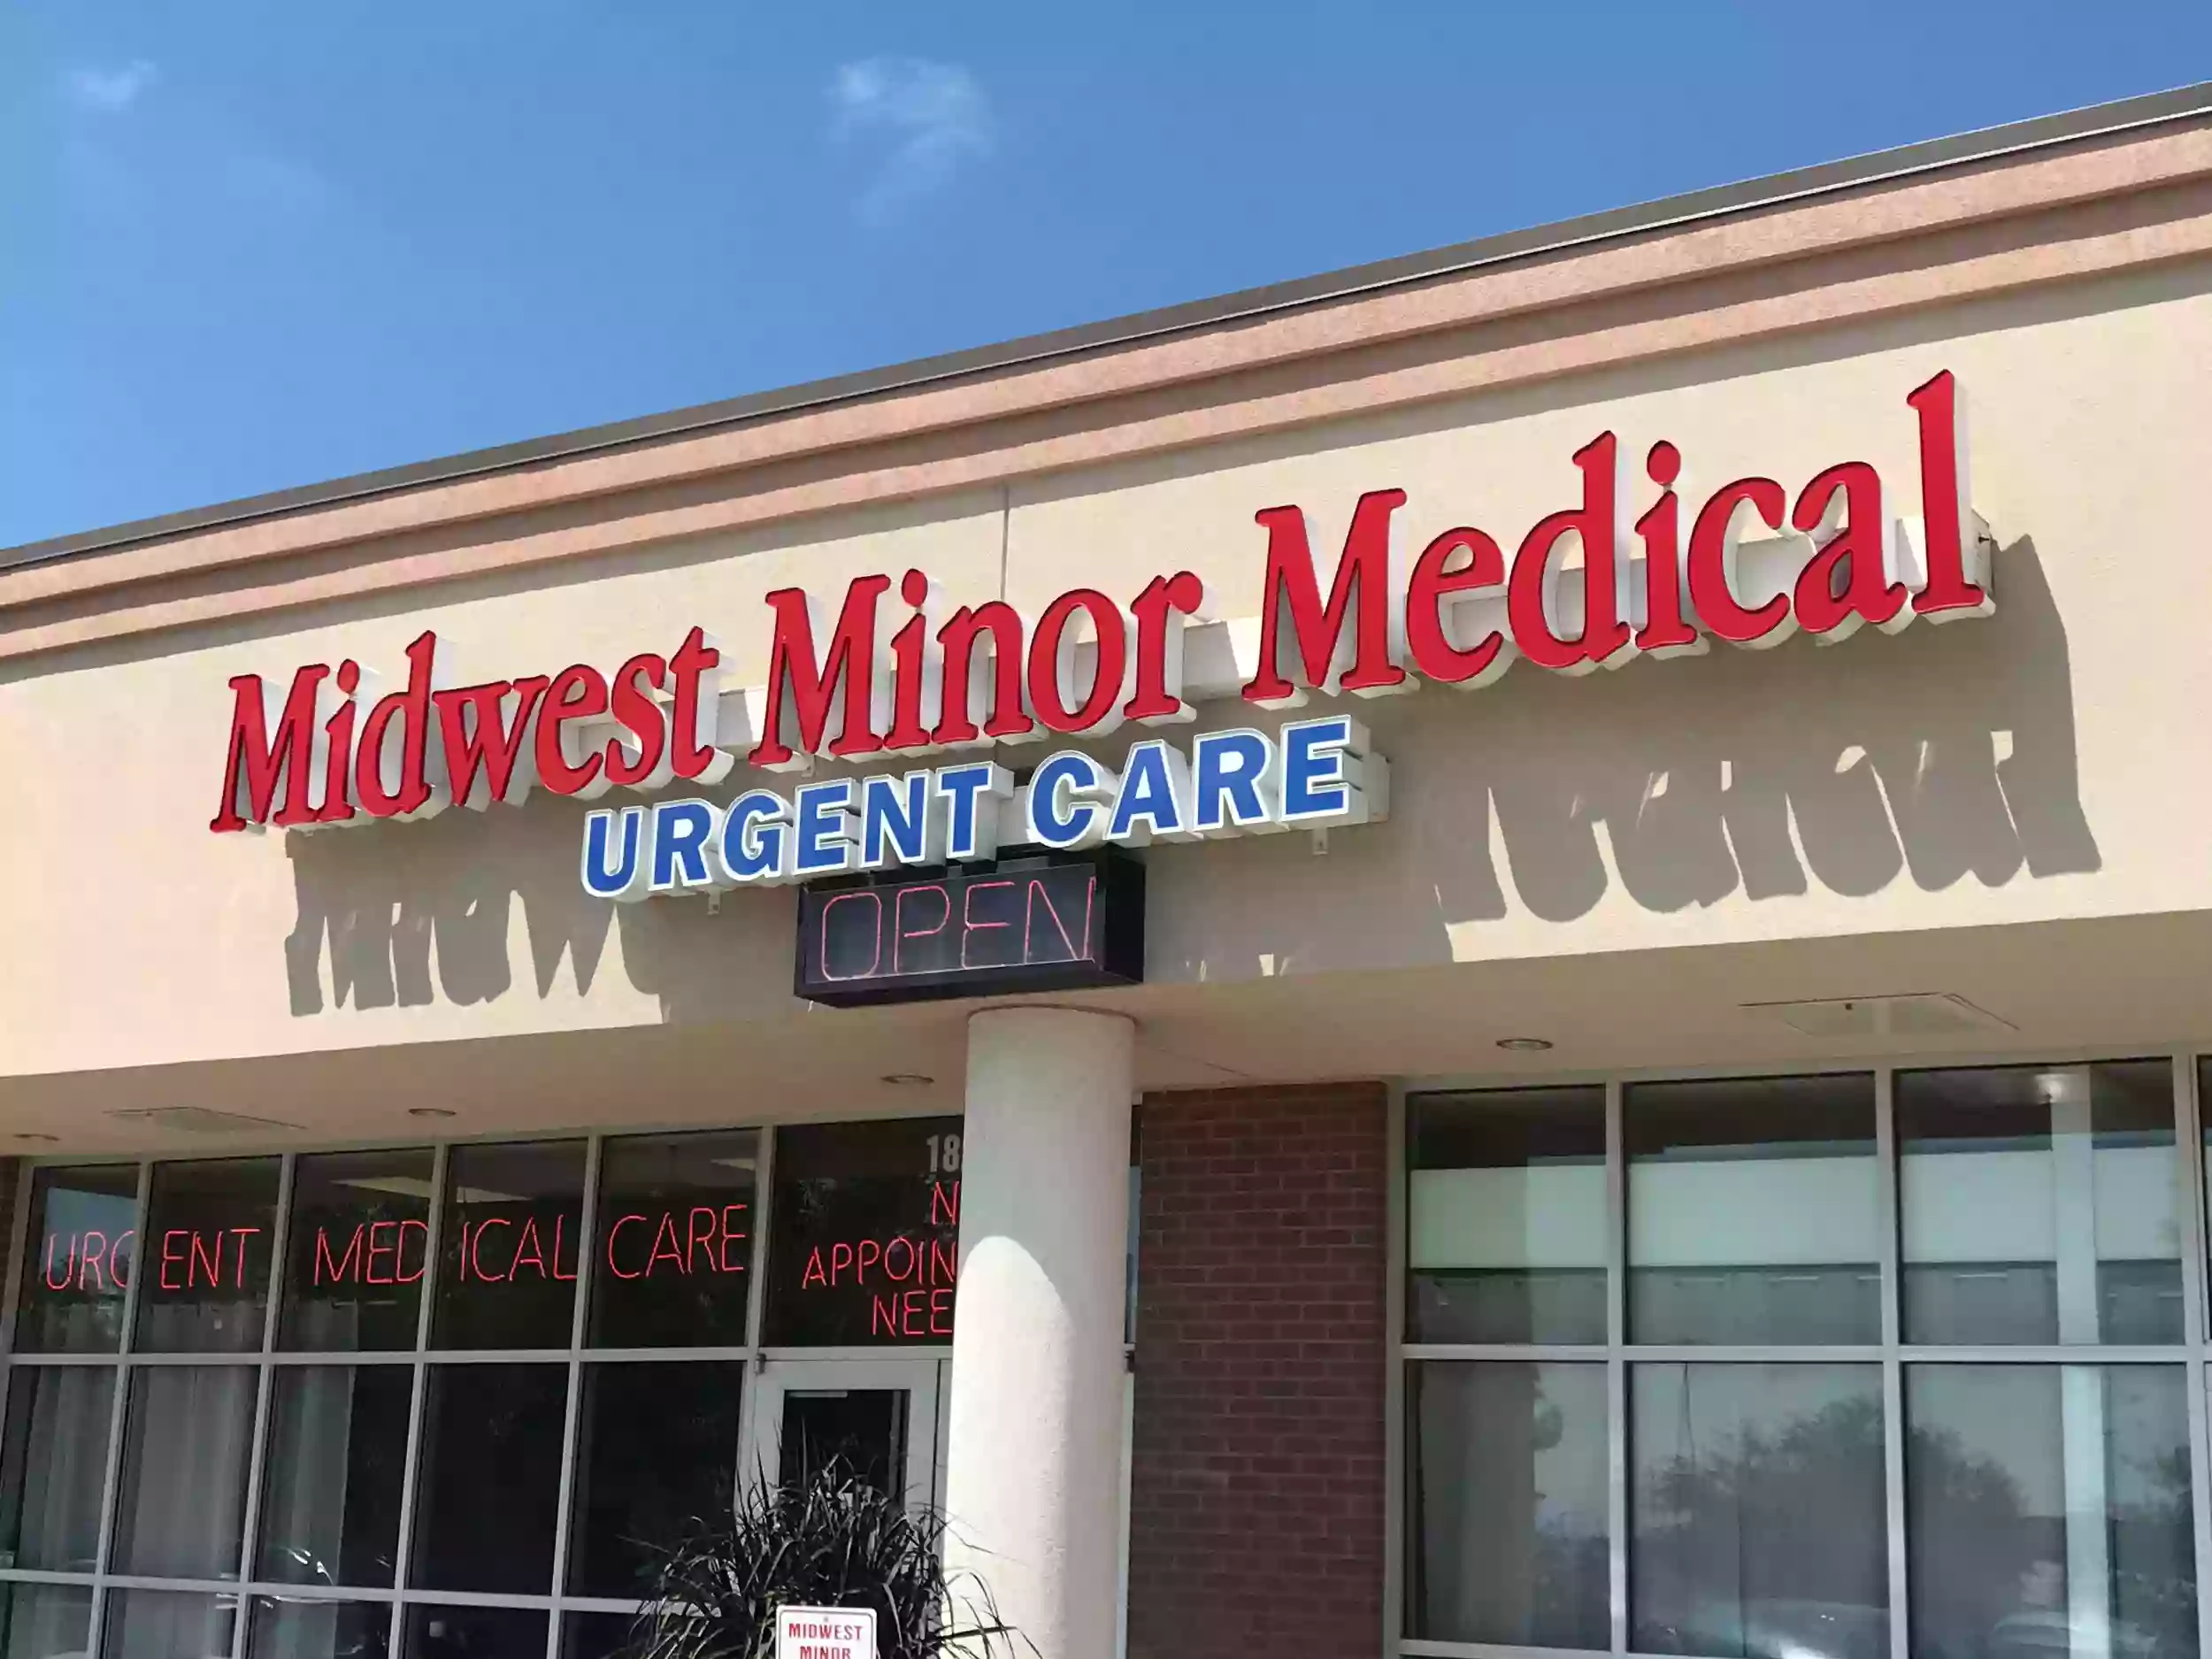 Midwest Minor Medical